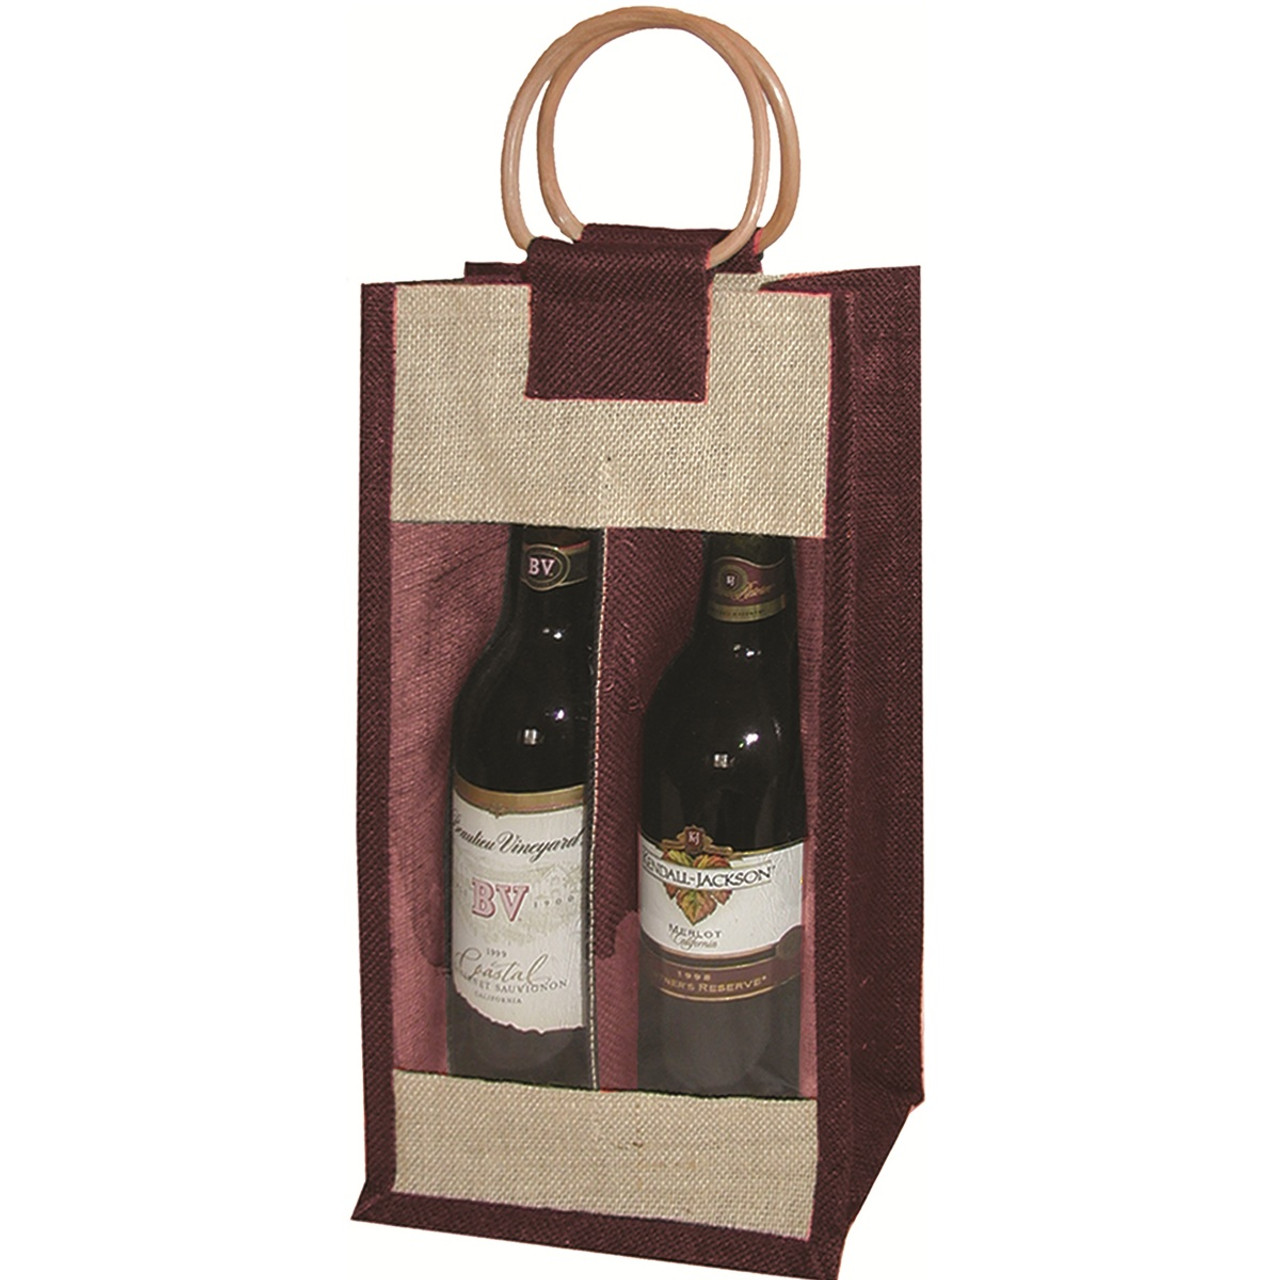 Amazon.com: opux Two Bottle Wine Bag Carrier Tote, Insulated Leakproof 2 Bottle  Wine Cooler Bag for Travel BYOB Picnic, Portable Wine Case, Gift for Men  Women Wine Lover Birthday Party Christmas, Checker